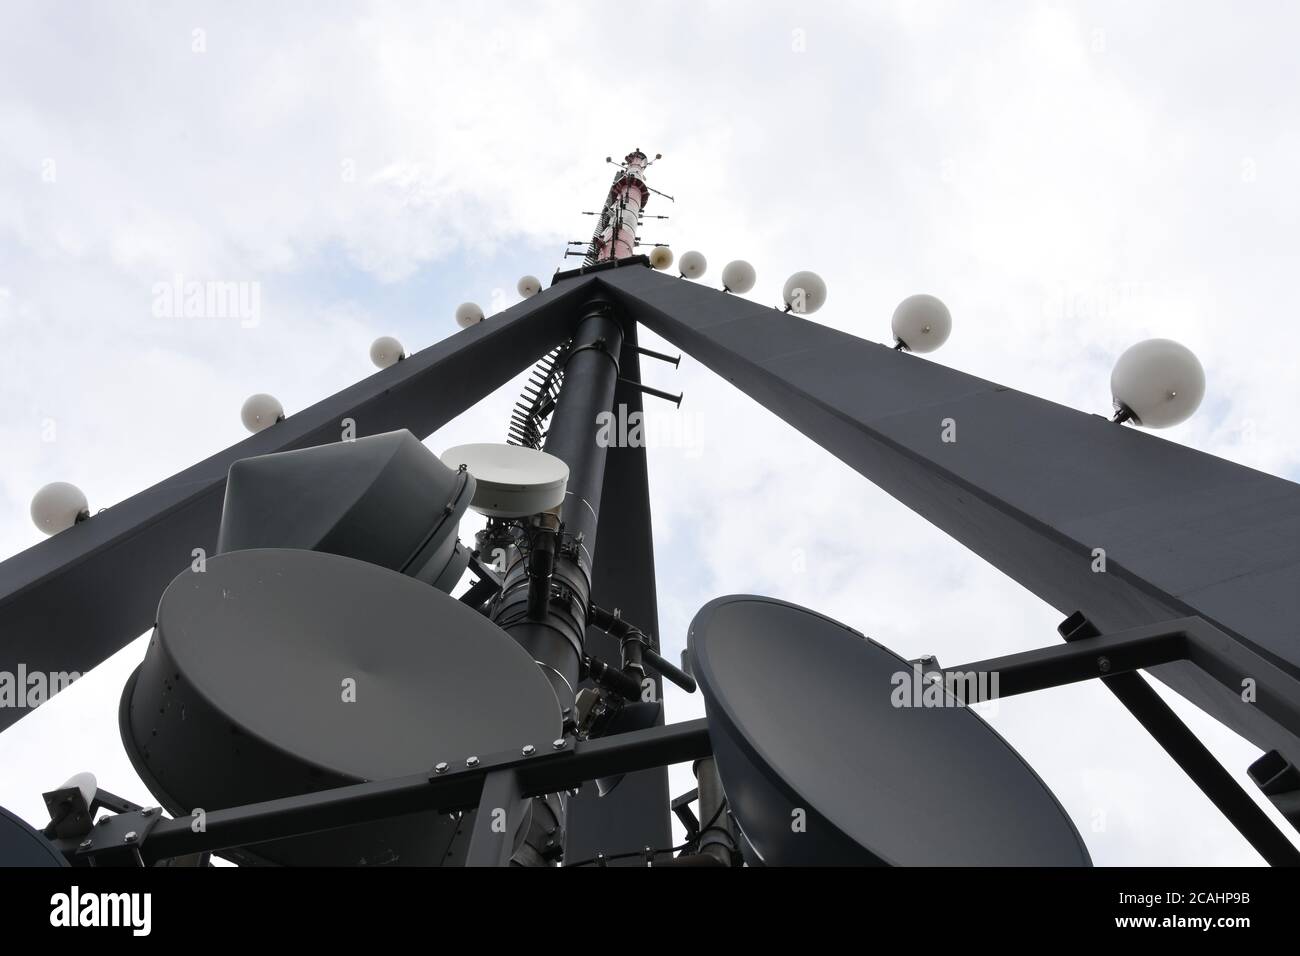 View on the top of look-out tower with antennas and amplifiers in Uetliberg mountain in the Swiss plateau, part of the Albis chain. Stock Photo